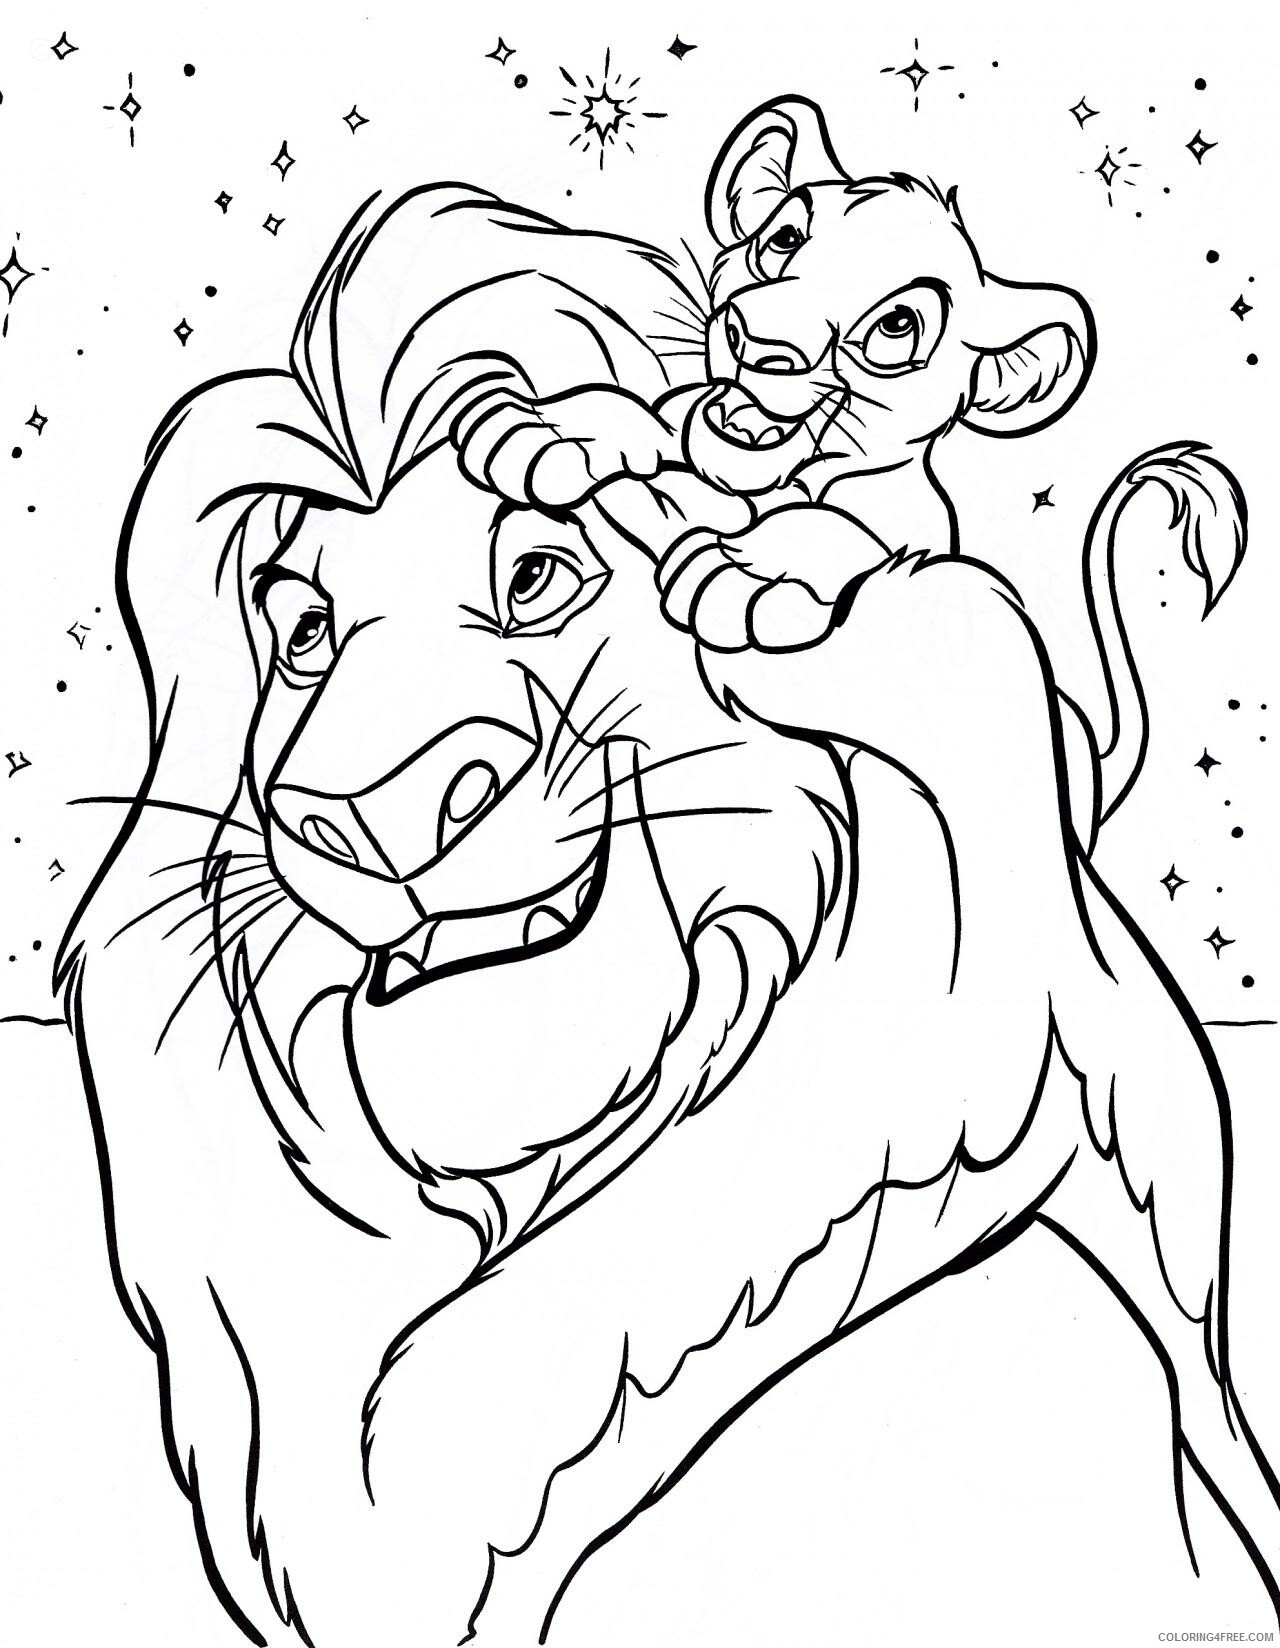 The Lion King Coloring Pages TV Film Free Lion King Printable 2020 09139 Coloring4free